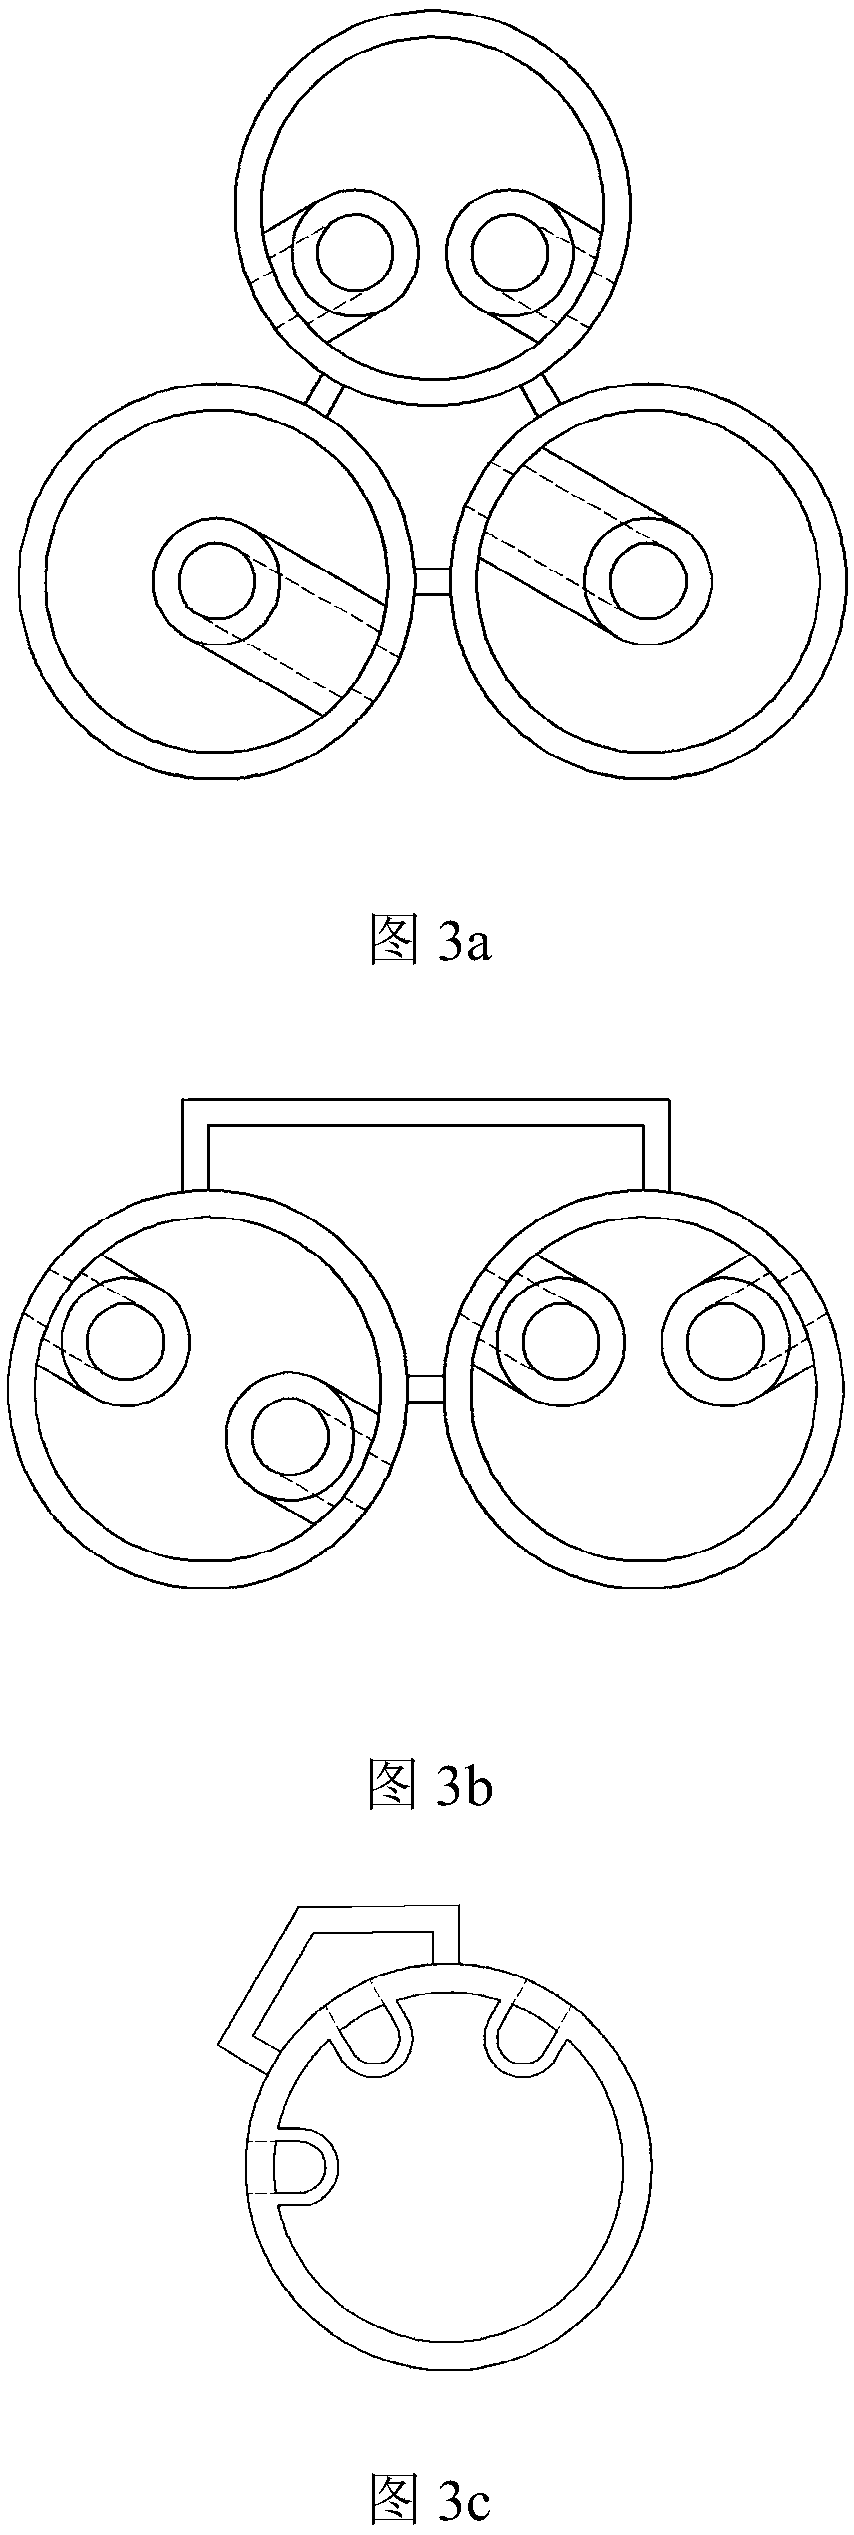 Sub-channel flow sampling device and method